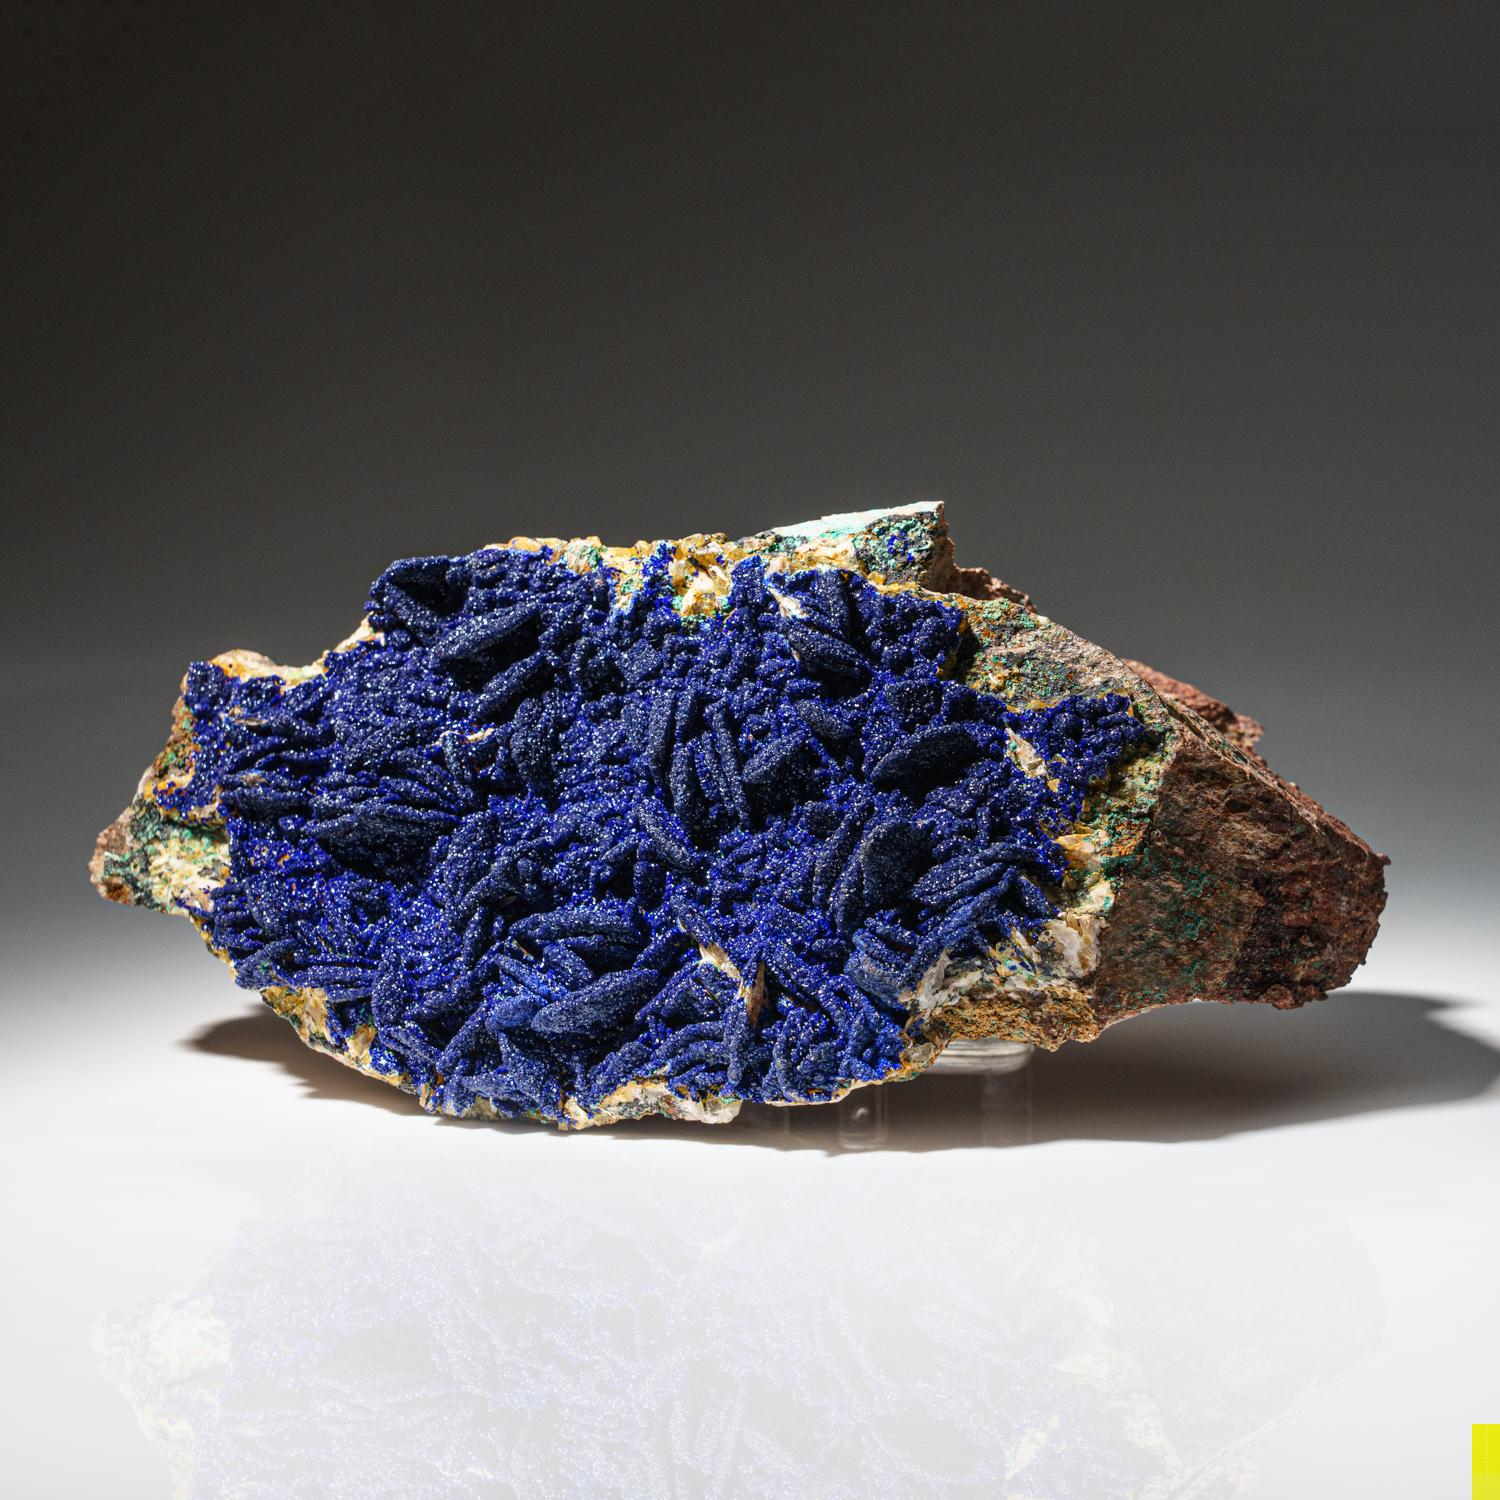 Moroccan Azurite from Ahouli Mines, Aouli, Zeida-Aouli-Mibladen belt, Midelt Province, Mo For Sale